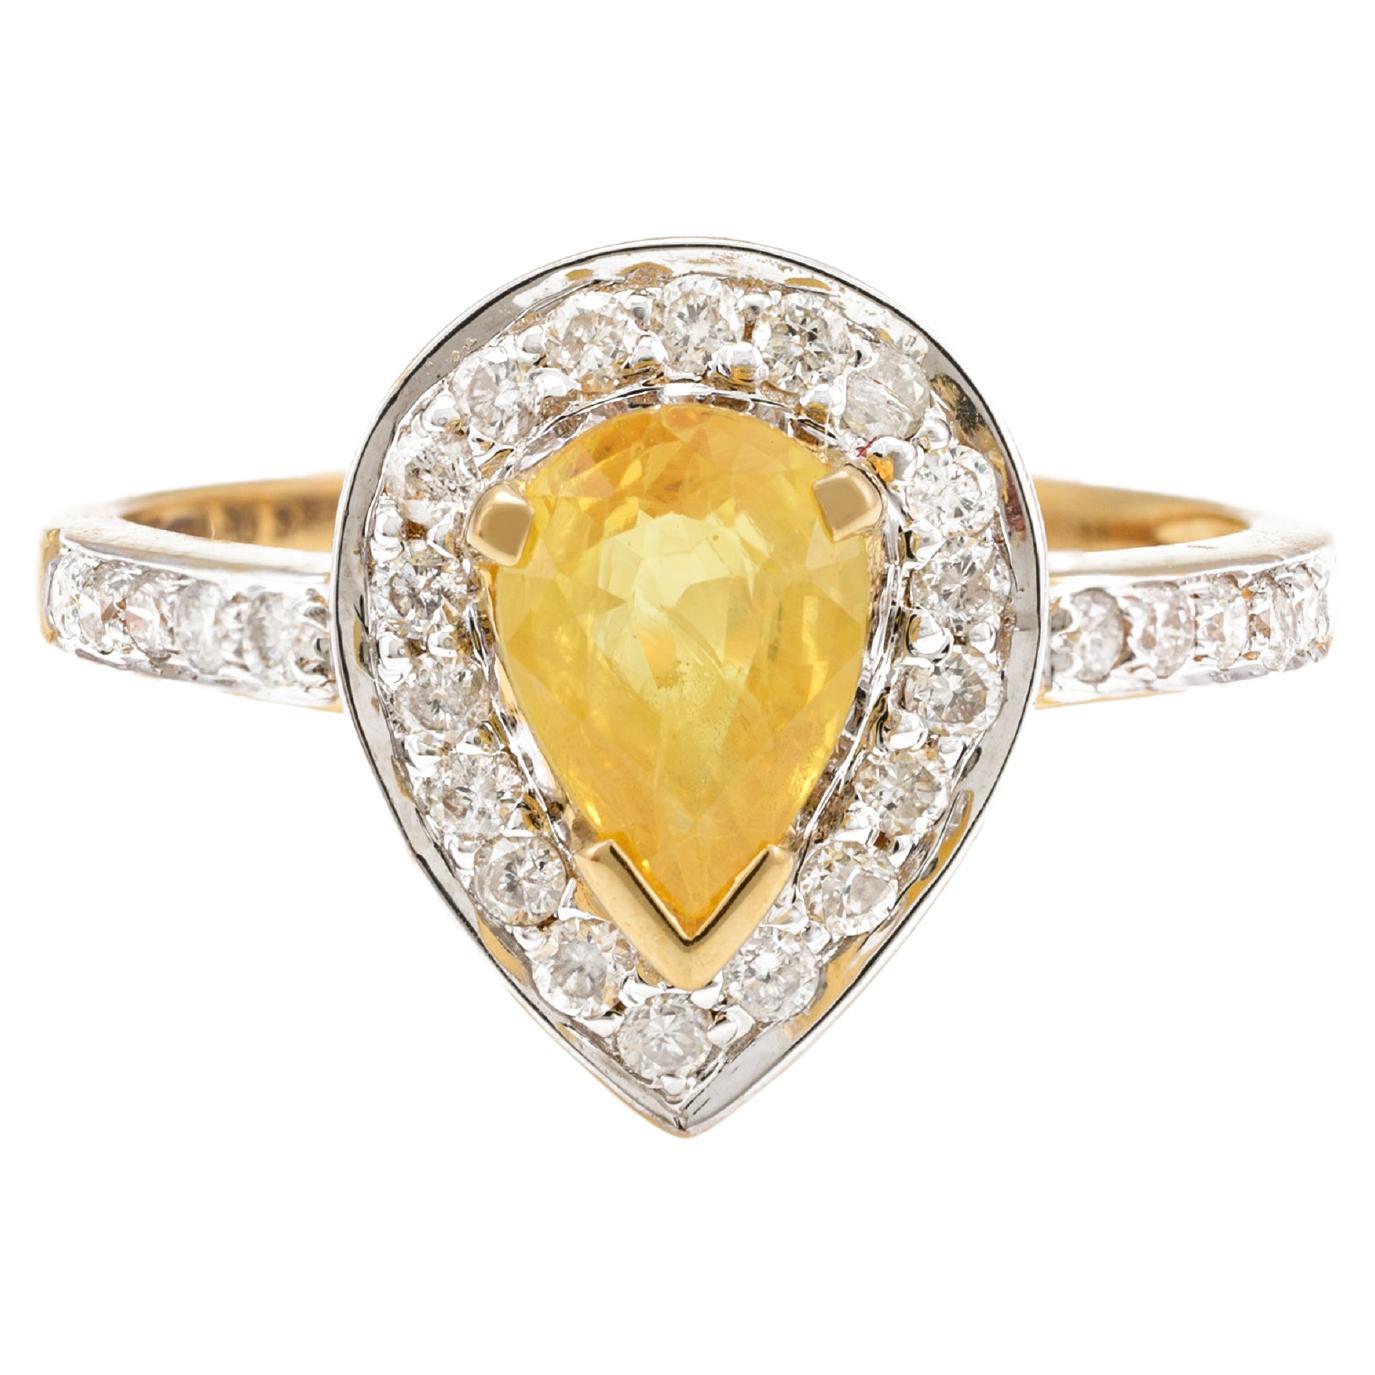 For Sale:  0.89 Ct Pear Cut Yellow Sapphire Diamond 18k Solid Yellow Gold Engagement Ring